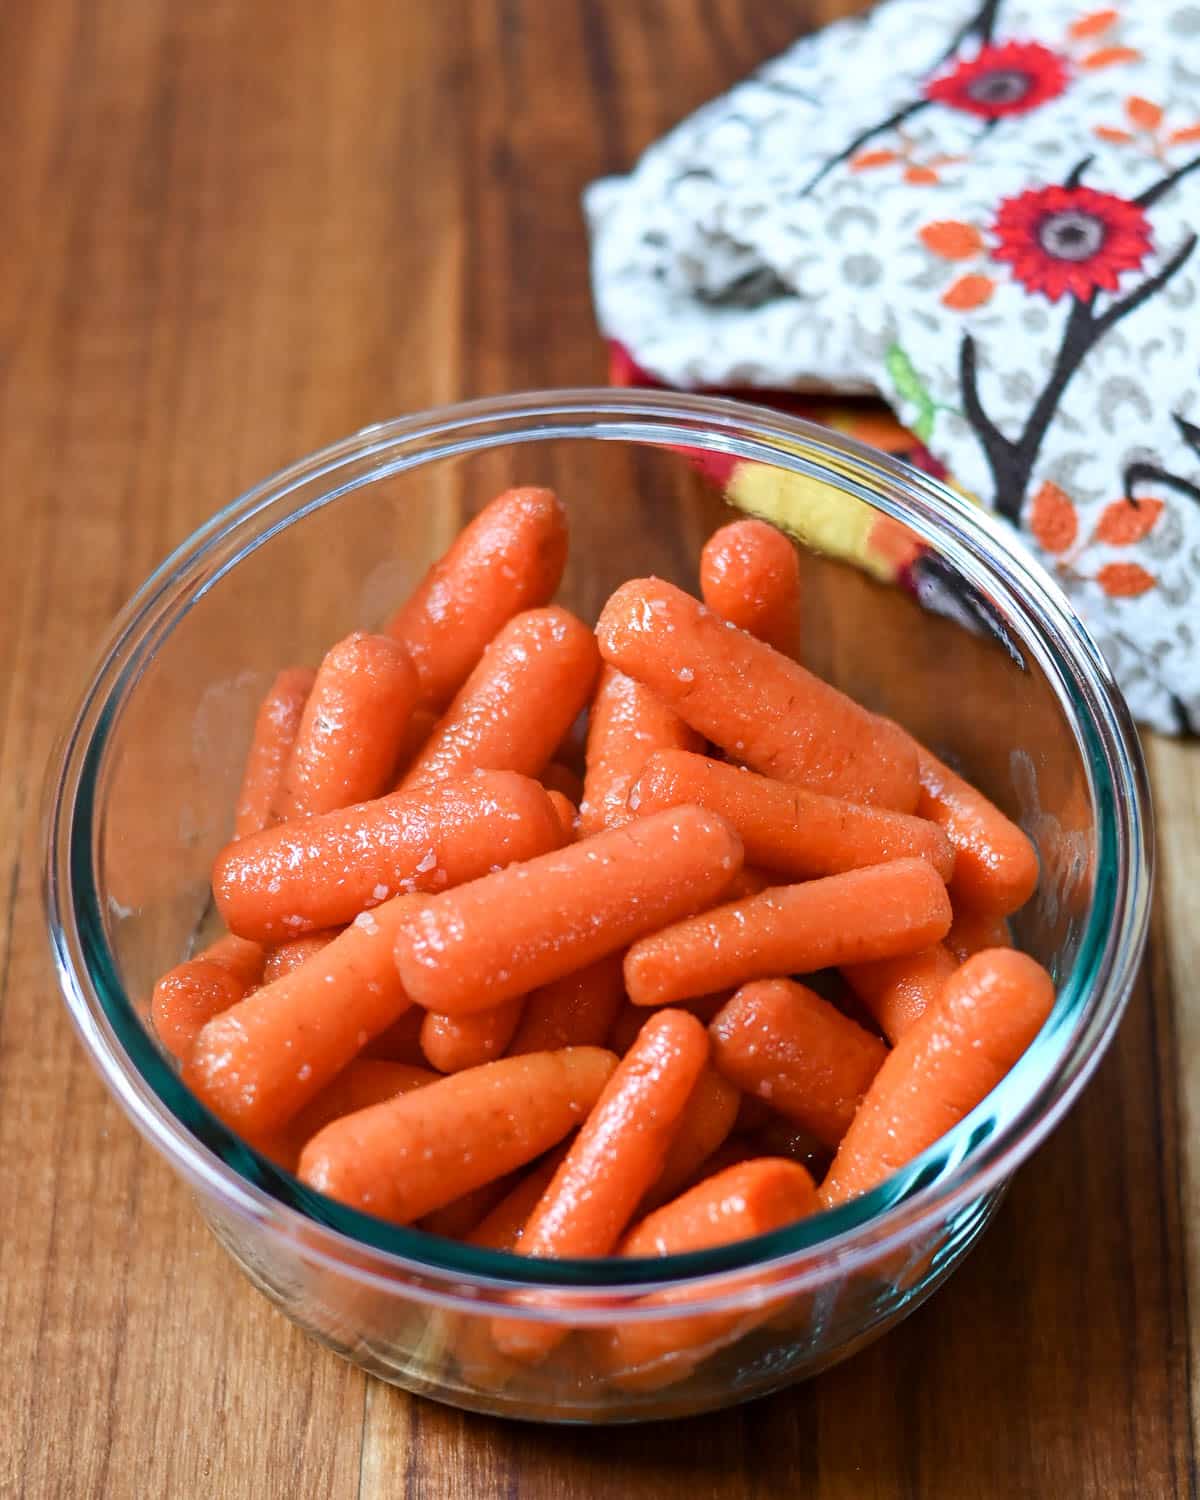 Glazed carrots in a clear glass bowl next to a kitchen towel.